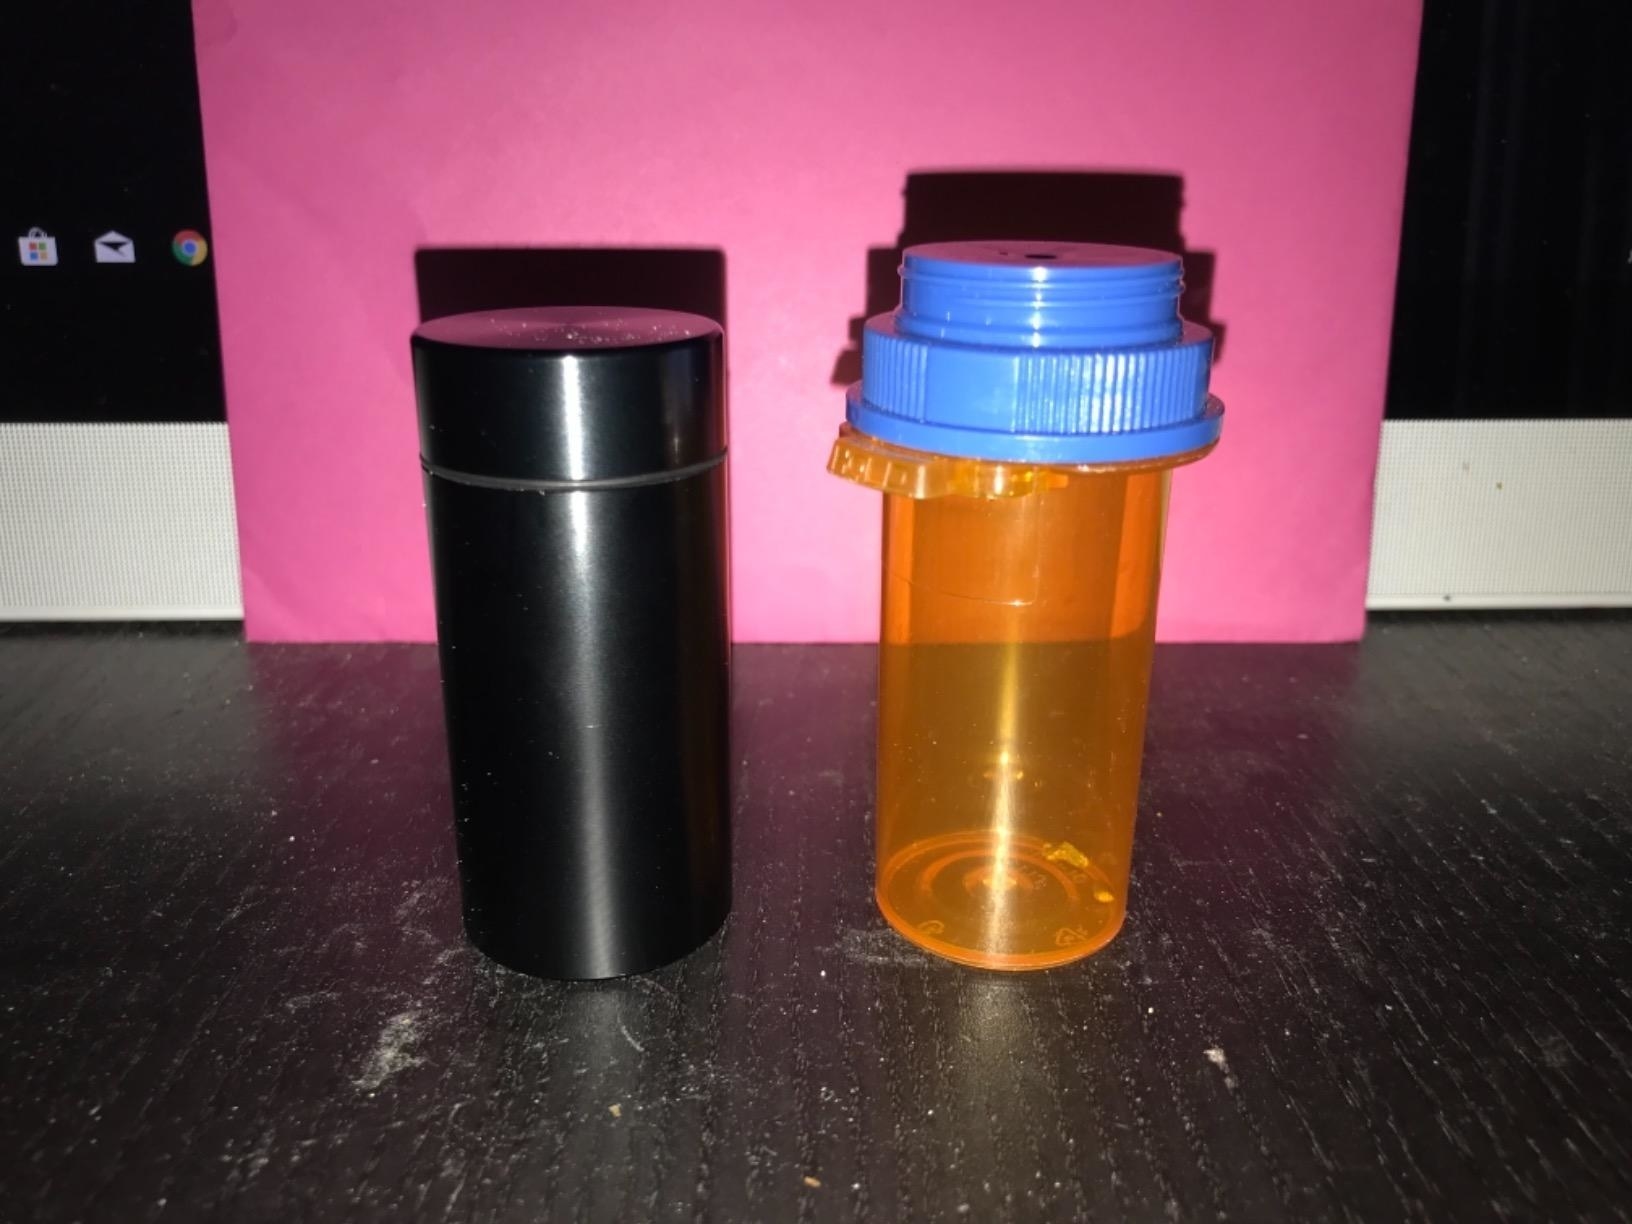 The jar compared to a pill jar, and it&#x27;s slightly smaller